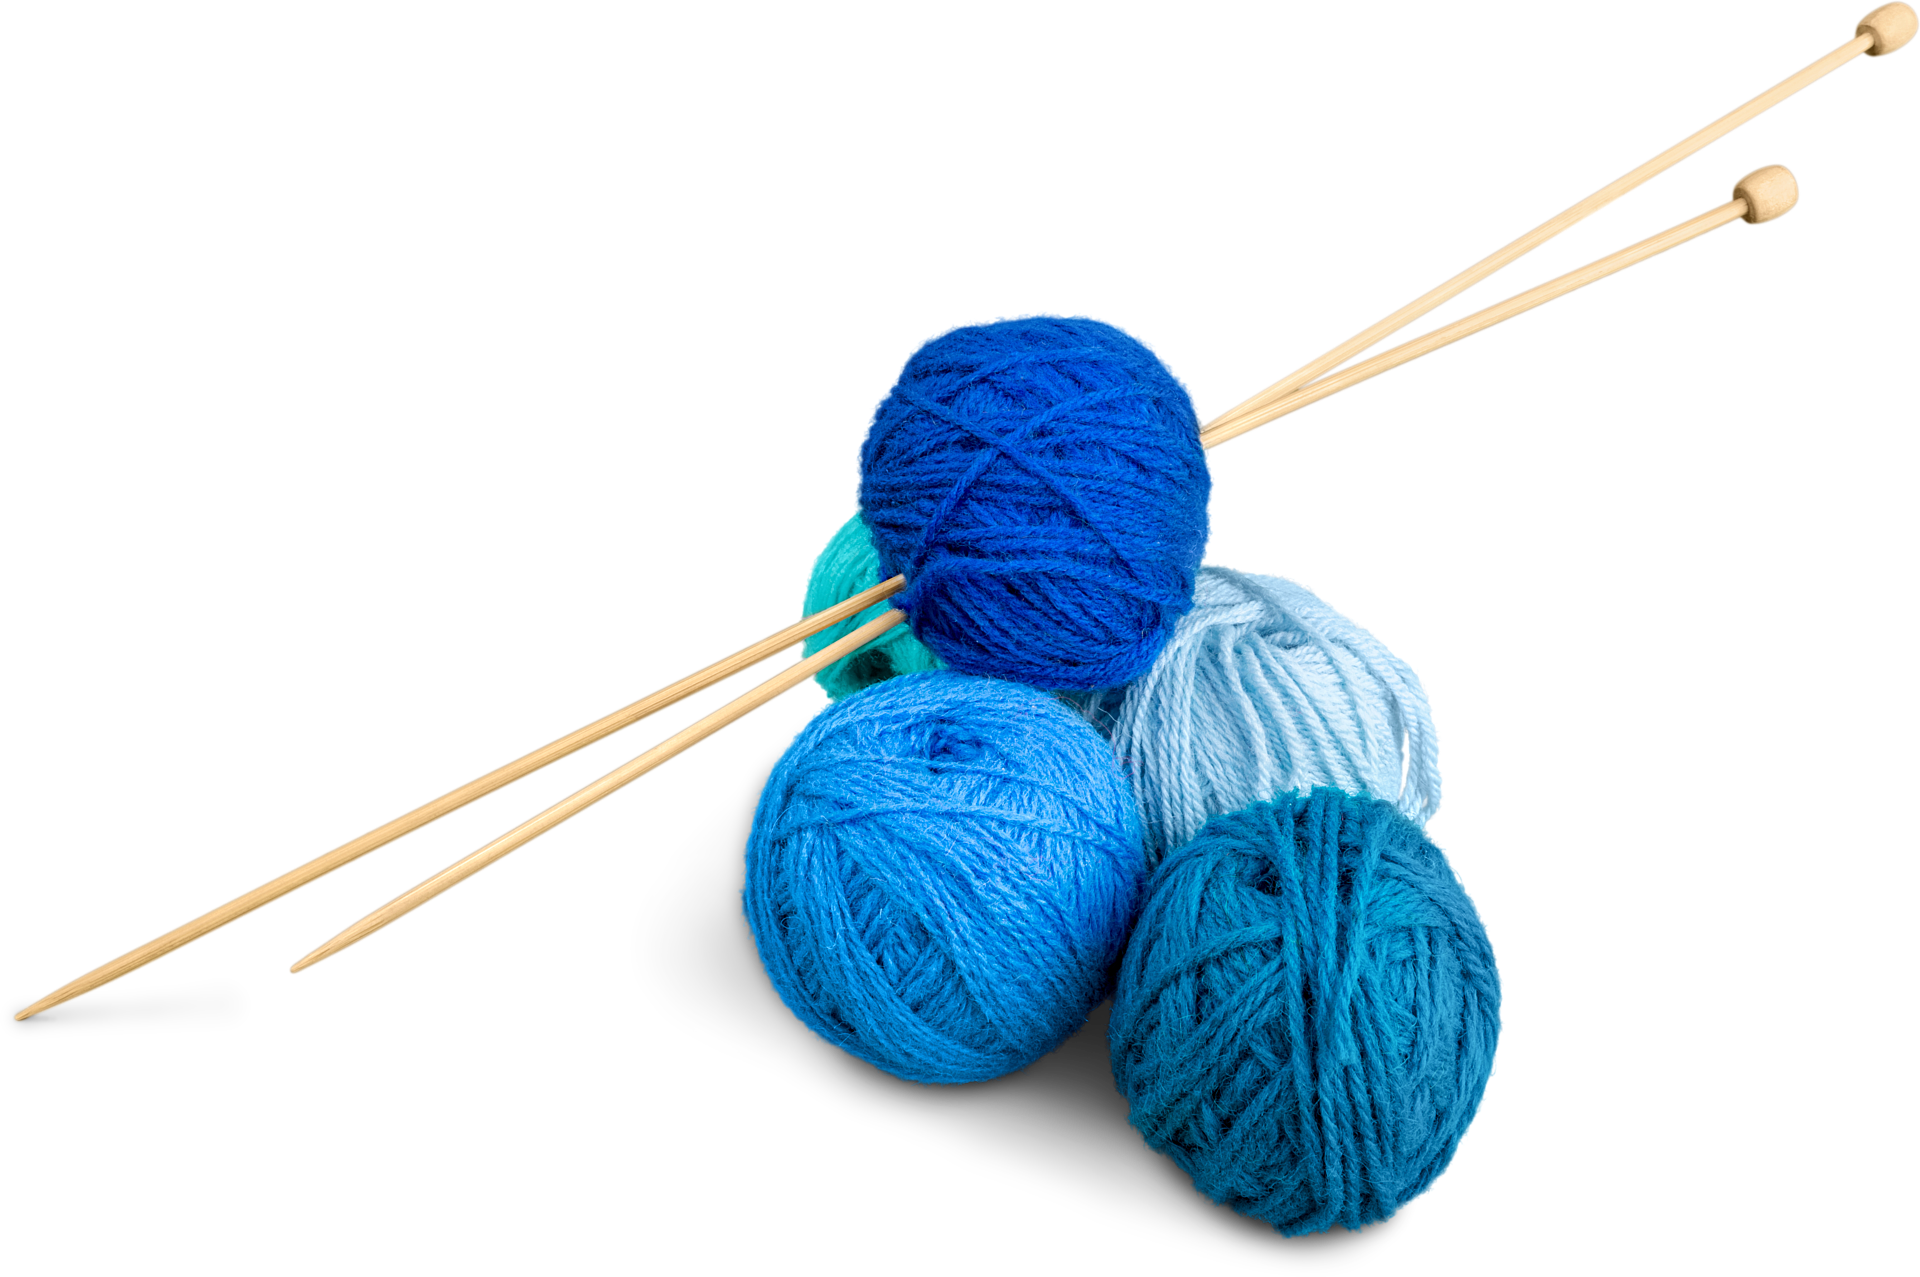 A Group Of Balls Of Yarn With Needles